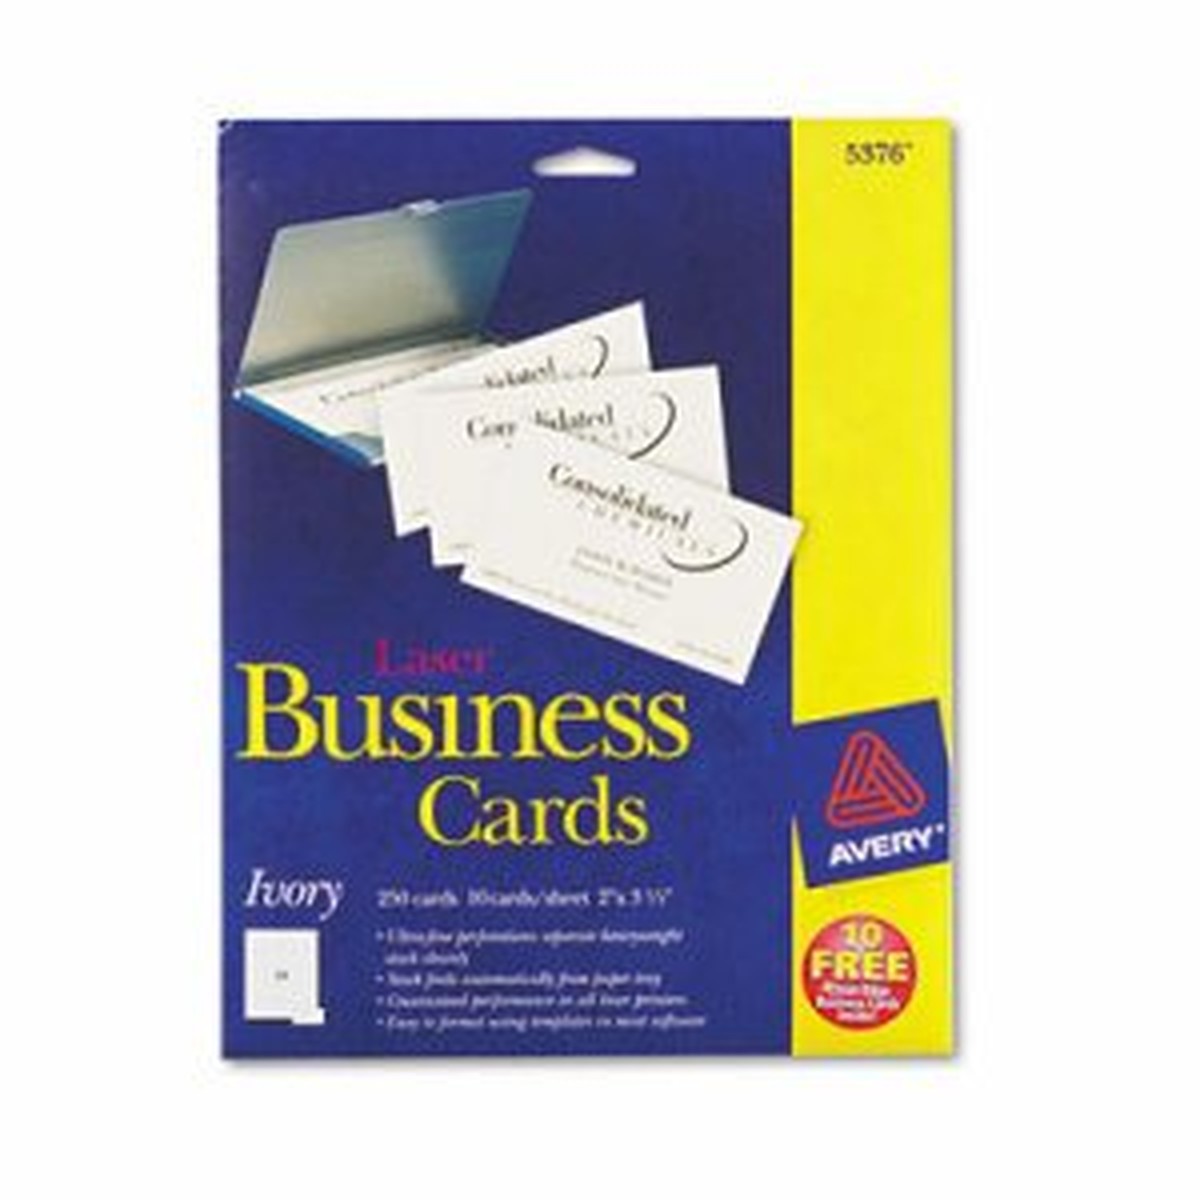 Printable Microperf Business Cards, Laser, 2 x 3 1/2, Ivory, Uncoated, 250/Pack